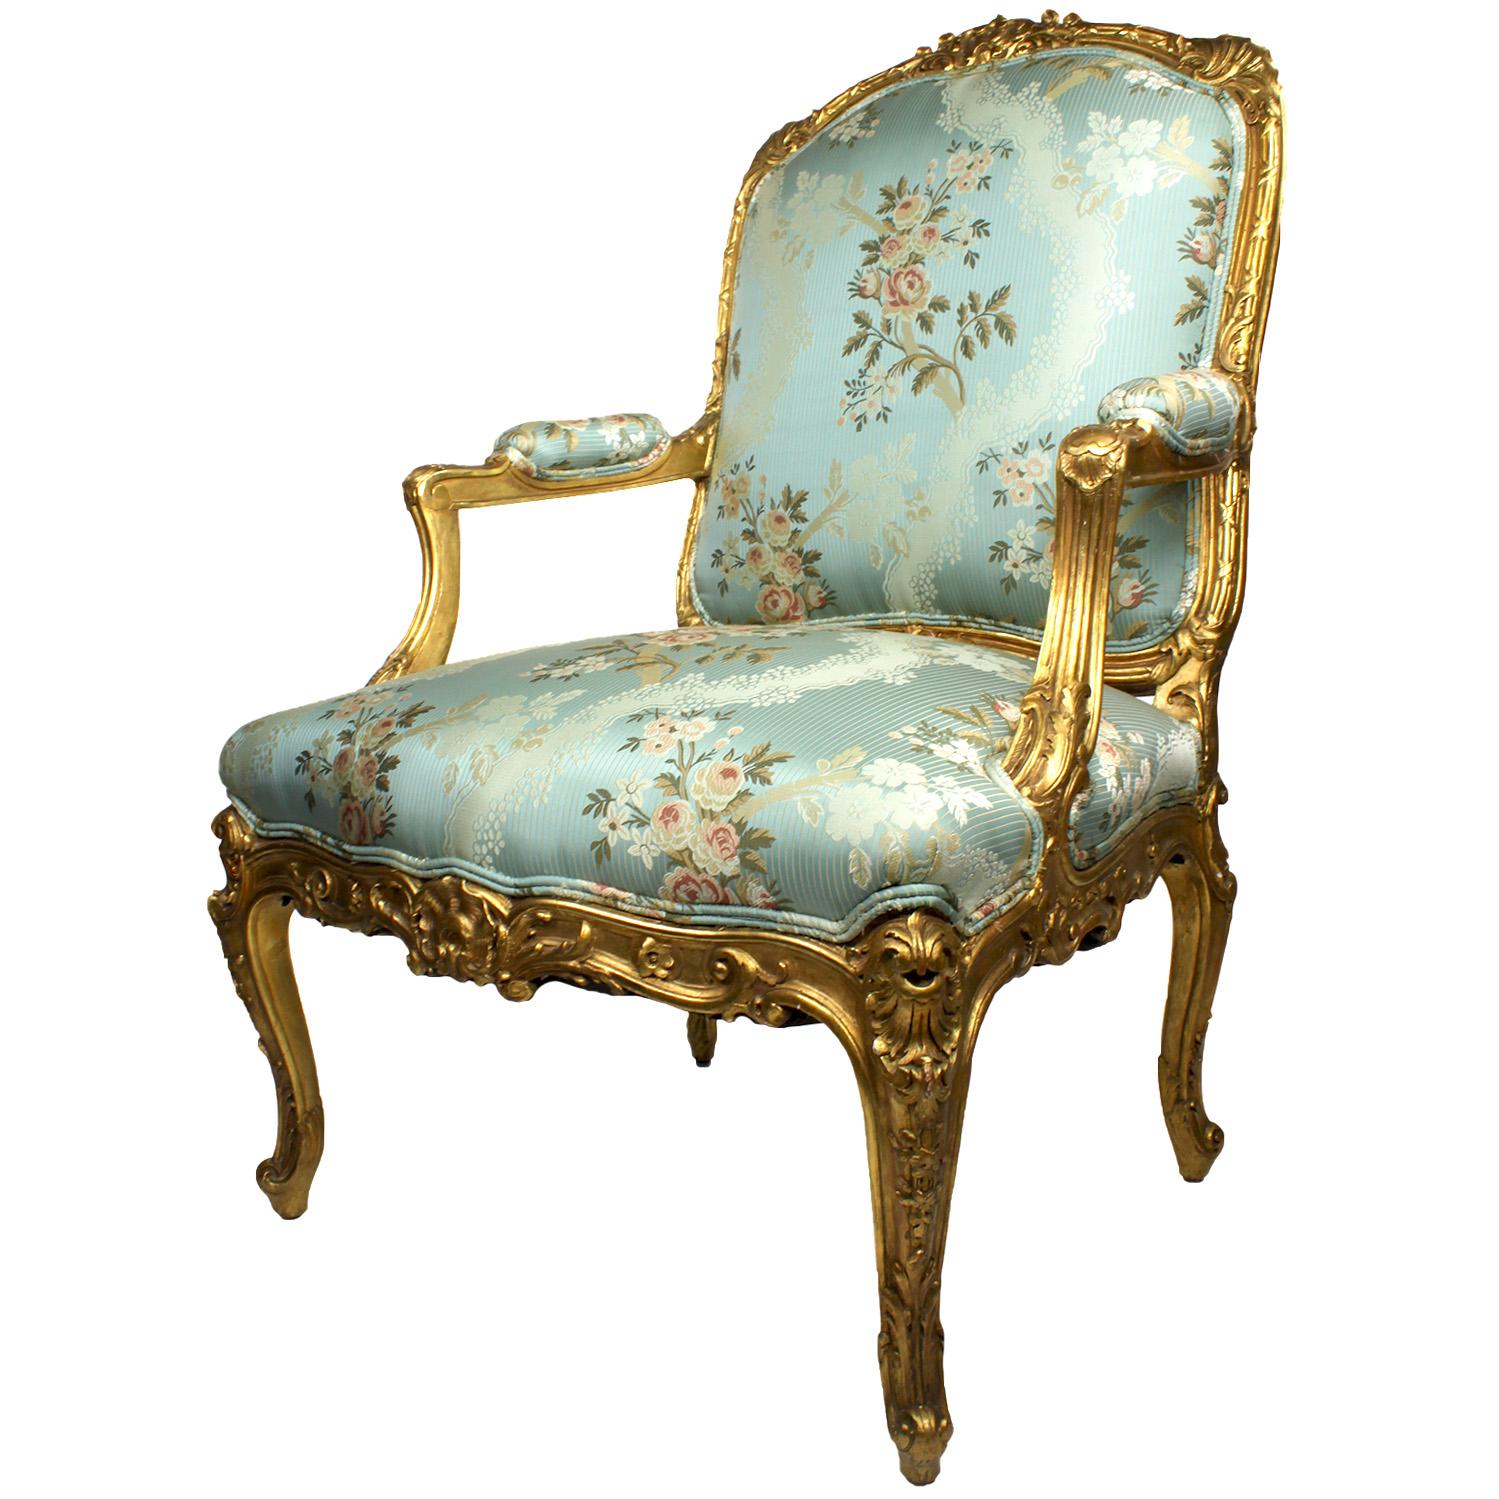 A Very Fine Pair of French 19th Century Louis XV style giltwood Carved 'Fauteuils a la Reine' Armchairs. The superbly carved frames, with padded backs, armrests and seats, all upholstered in a recent silk and cotton fabric, topped with floral